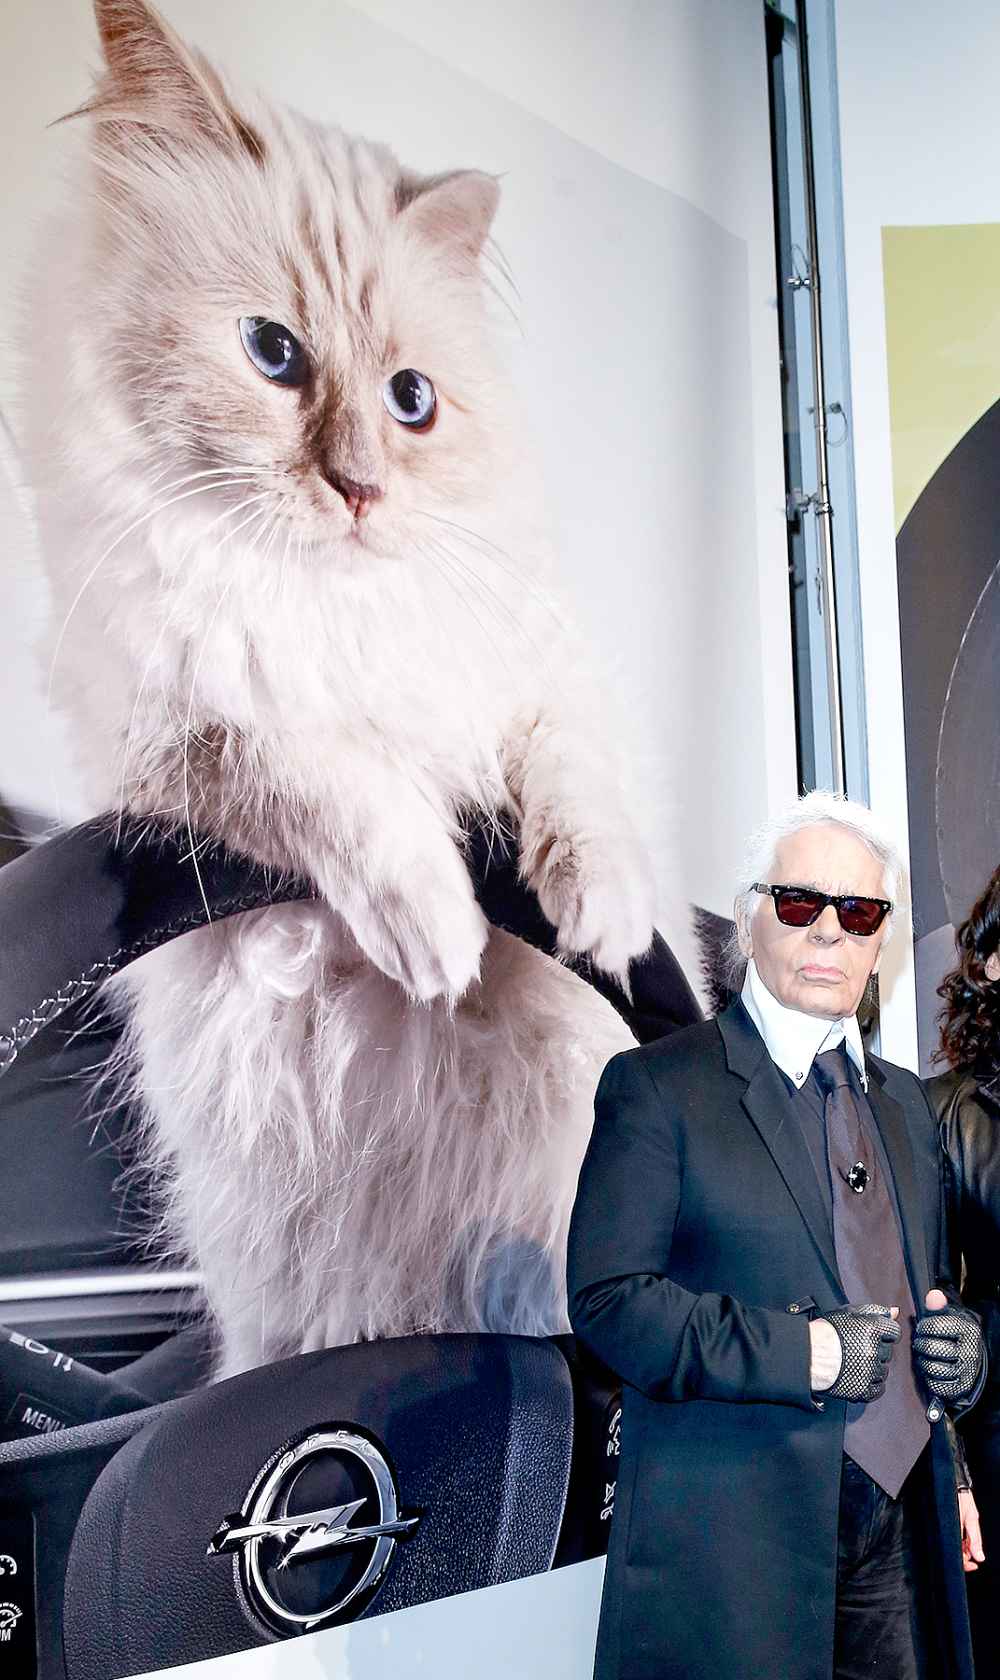 Karl Lagerfeld attends the 'Corsa Karl Und Choupette' Vernissage on February 03, 2015 in Berlin, Germany.